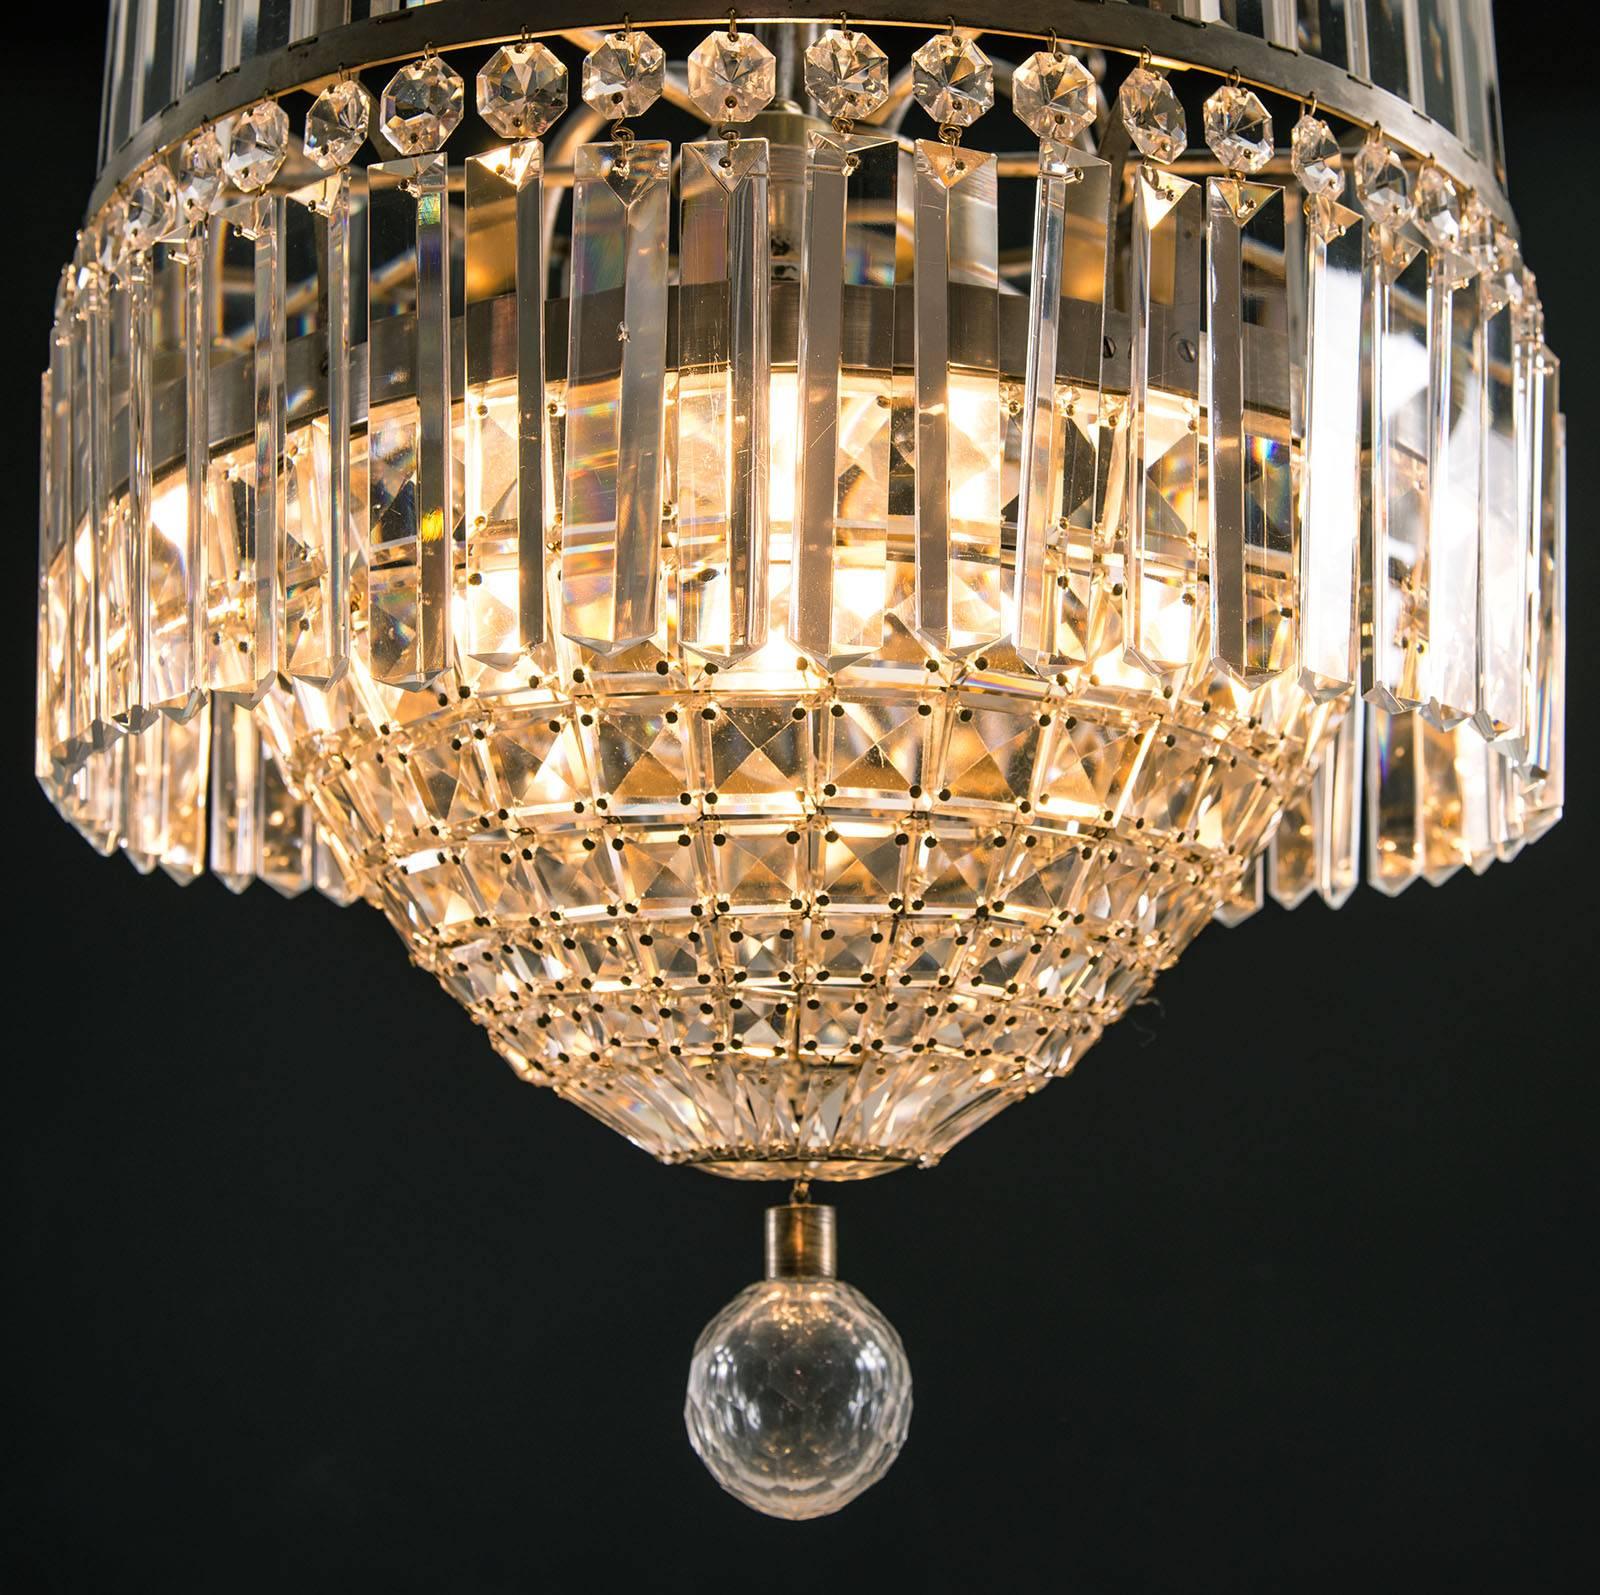 Beautiful parlour chandelier, Mid-Century Modern. Perfect cut.
Material.

Brass, nickel-plated with a patina, hand-cut glass-stones.